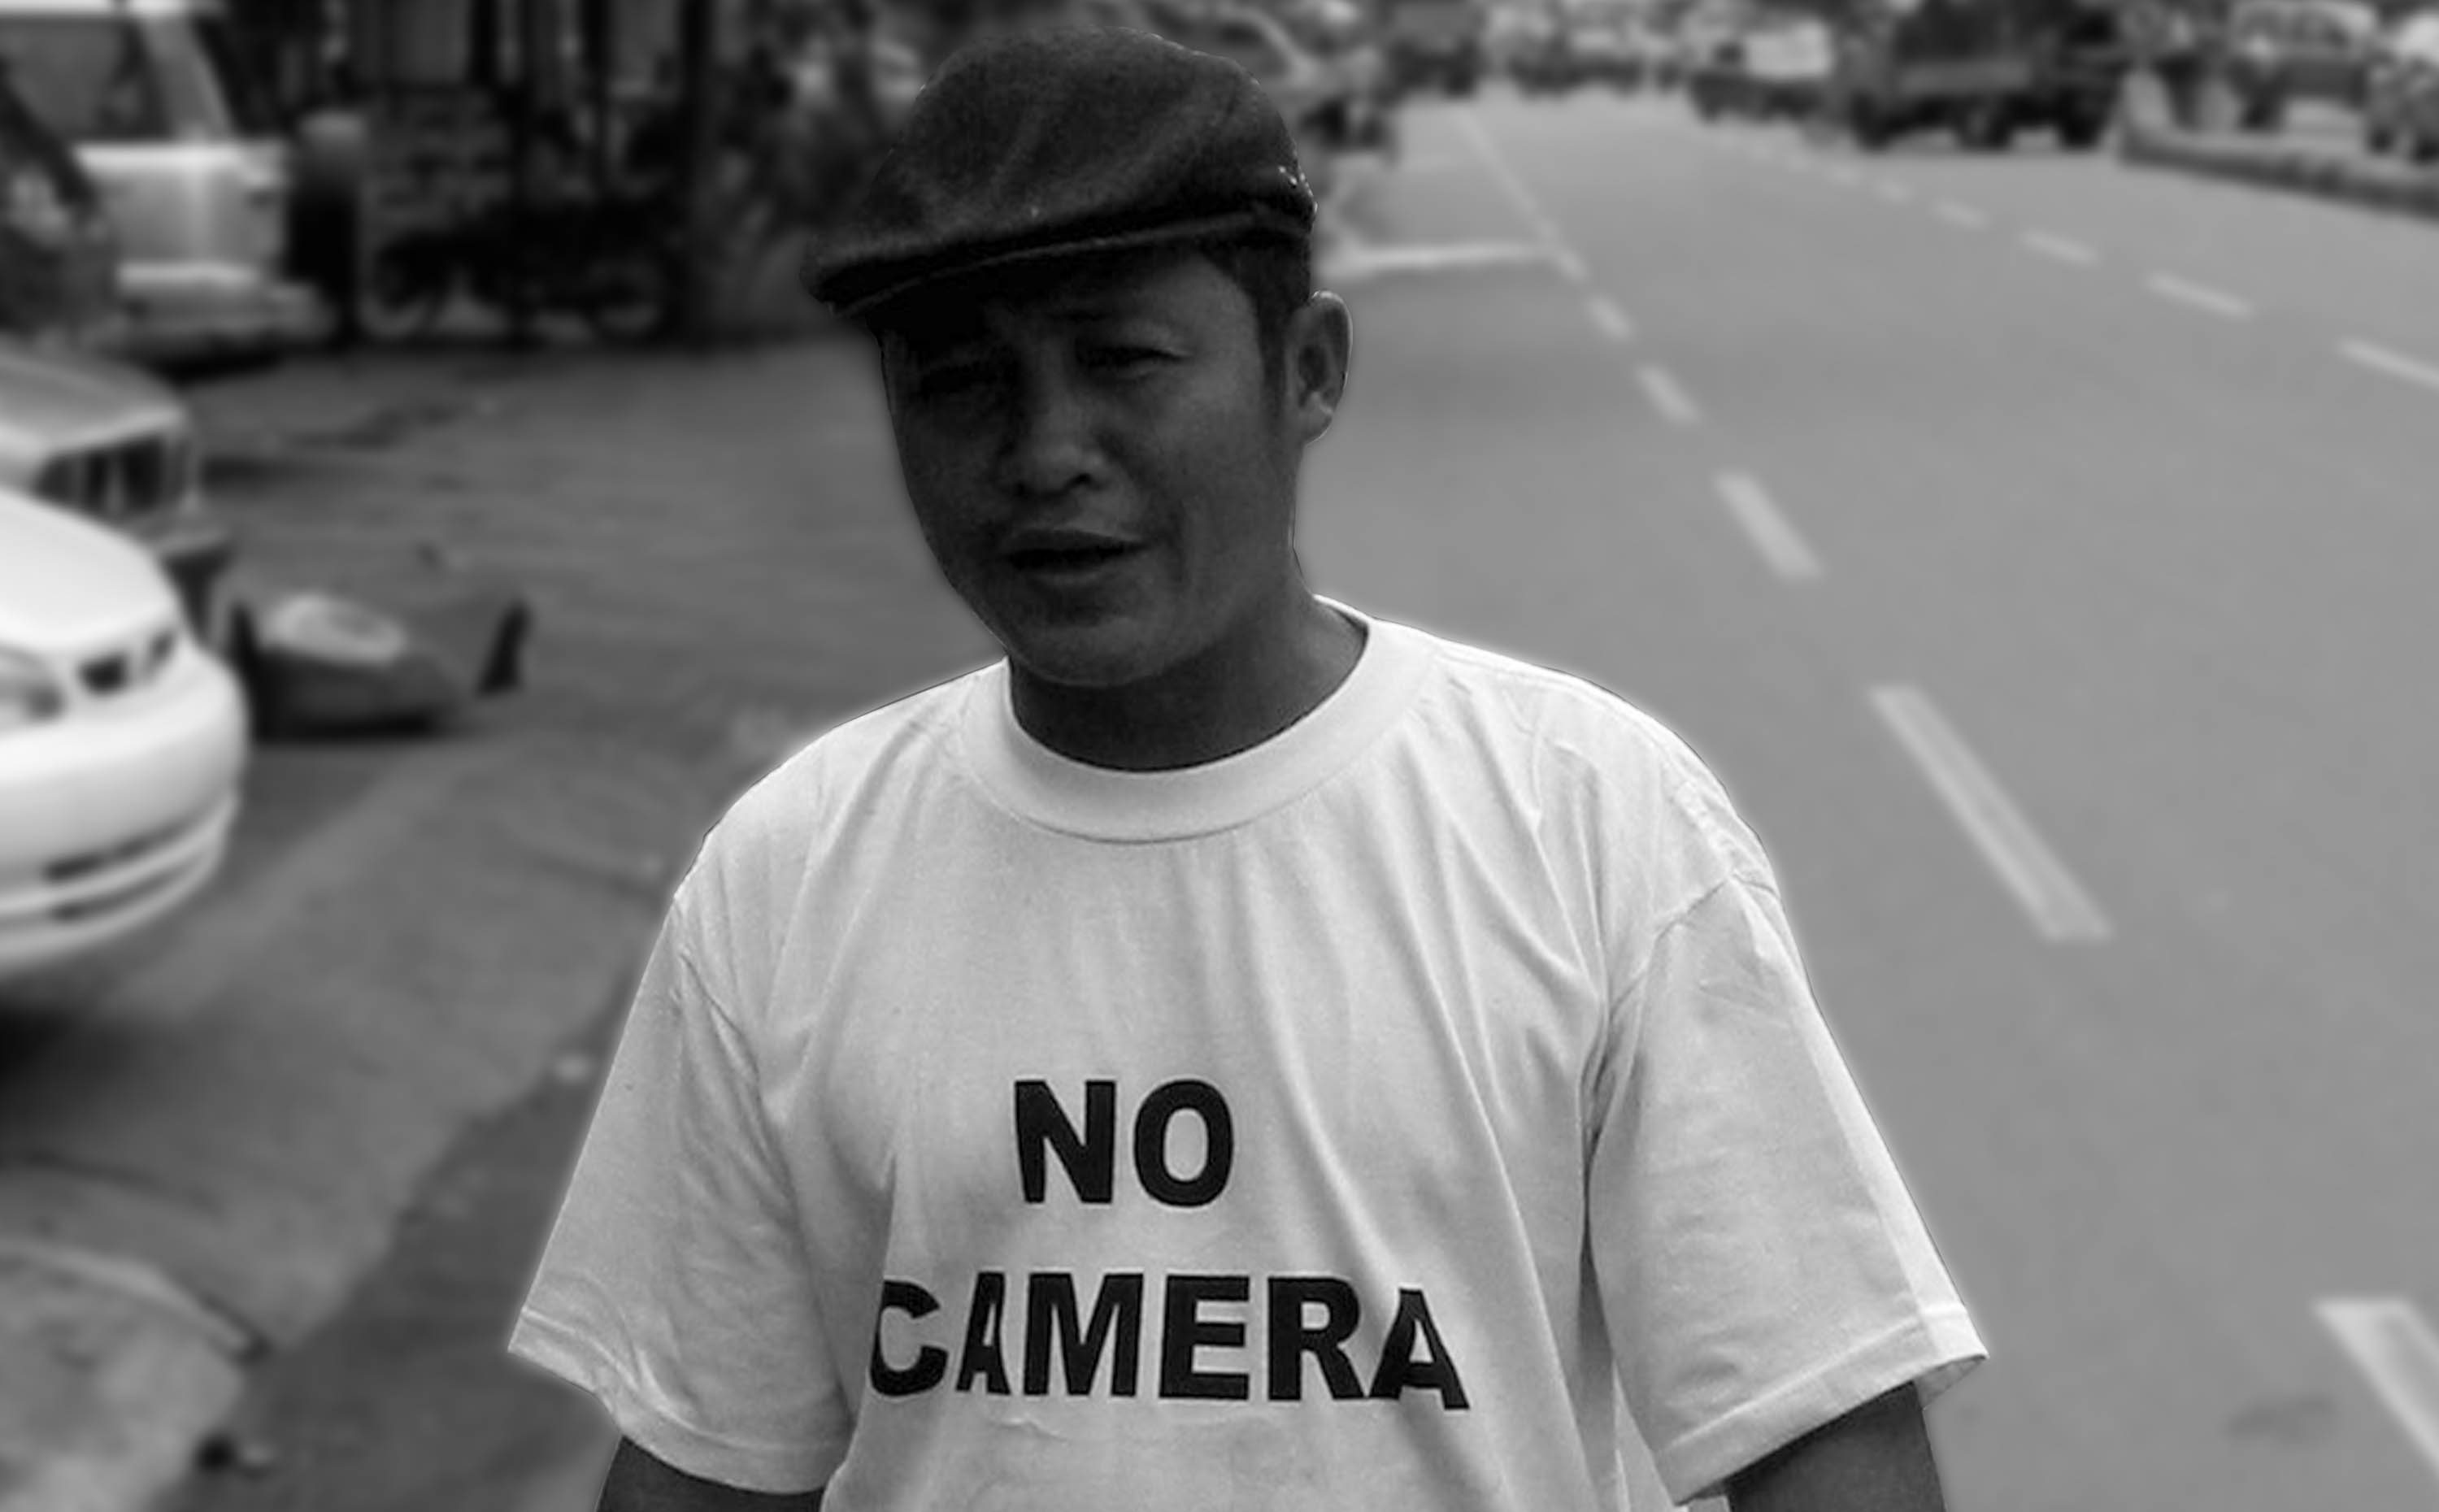 Cambodian man with a t-shirt that says No Camera